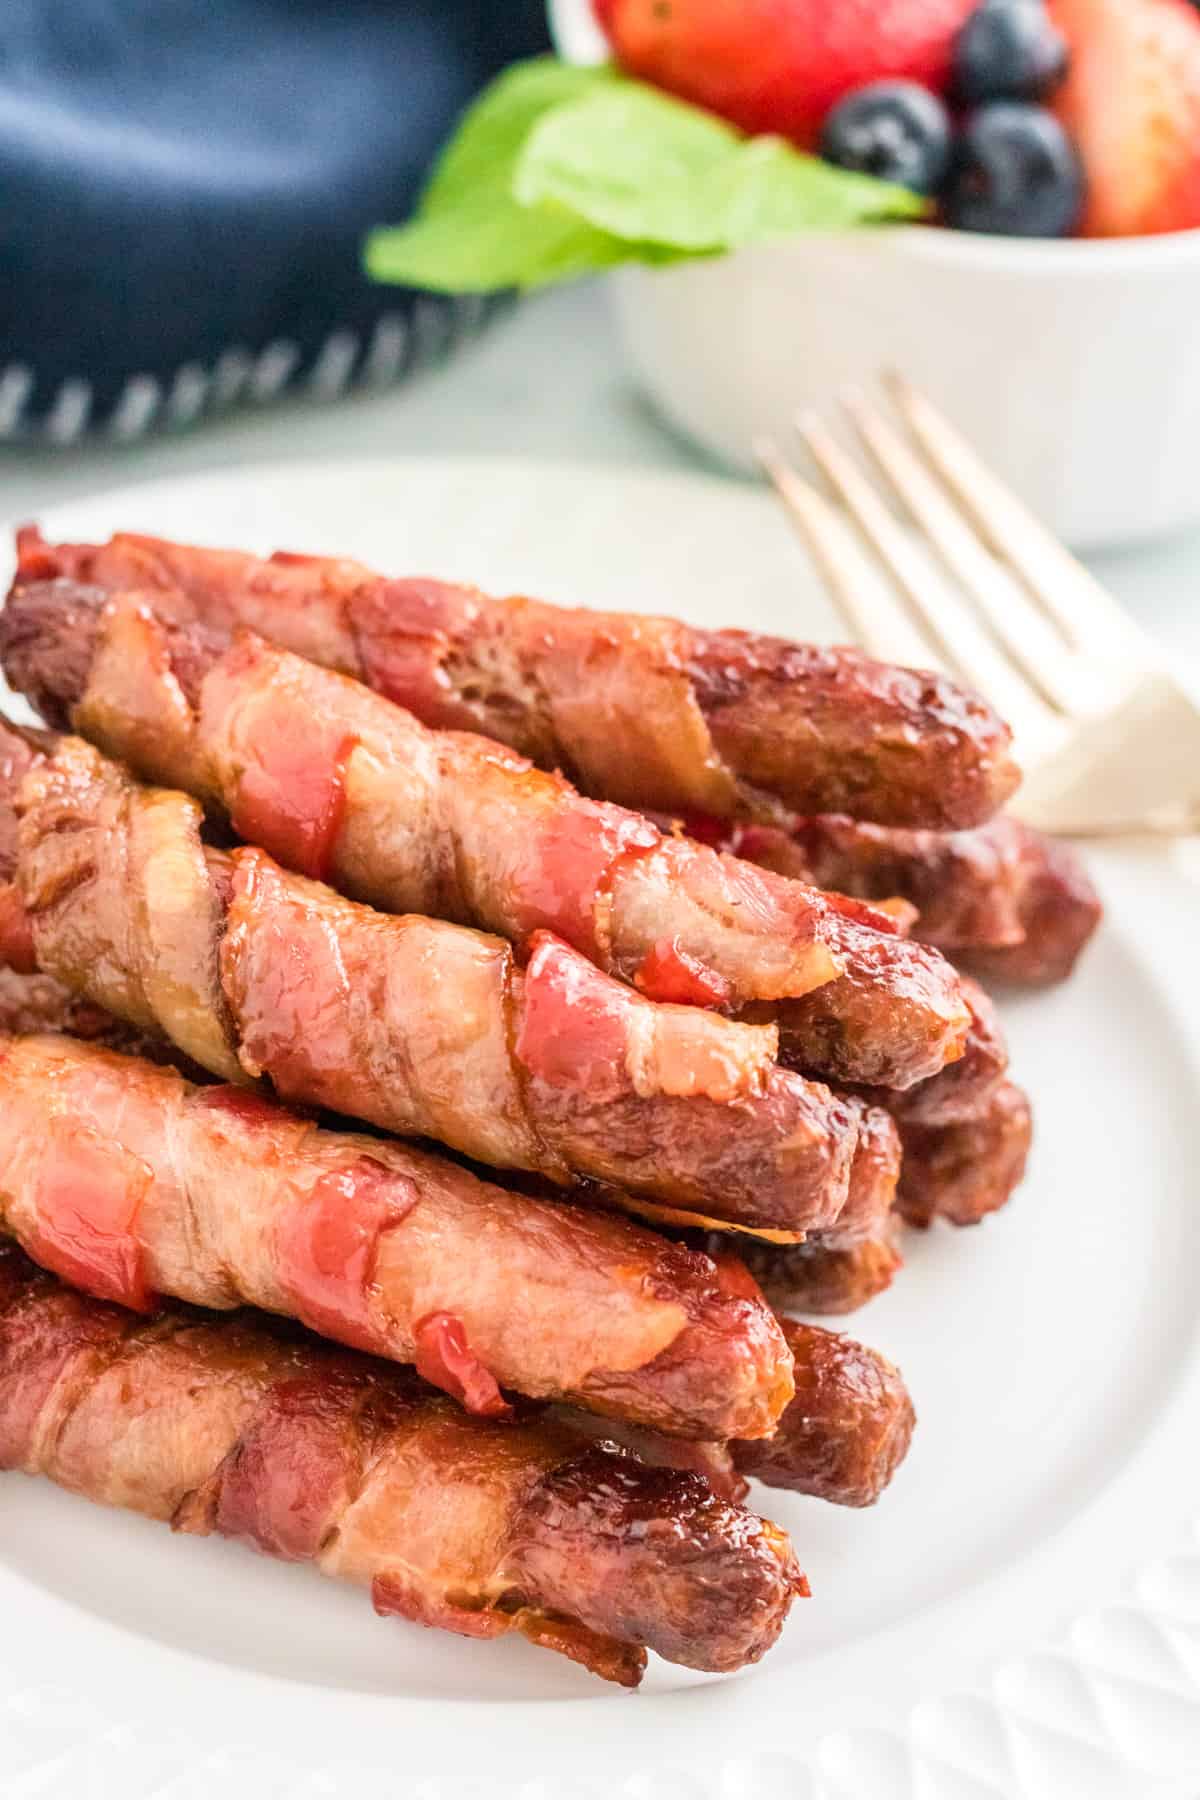 Bacon Wrapped Sausages stacked on white plate with fork and bowl of fruit in background.